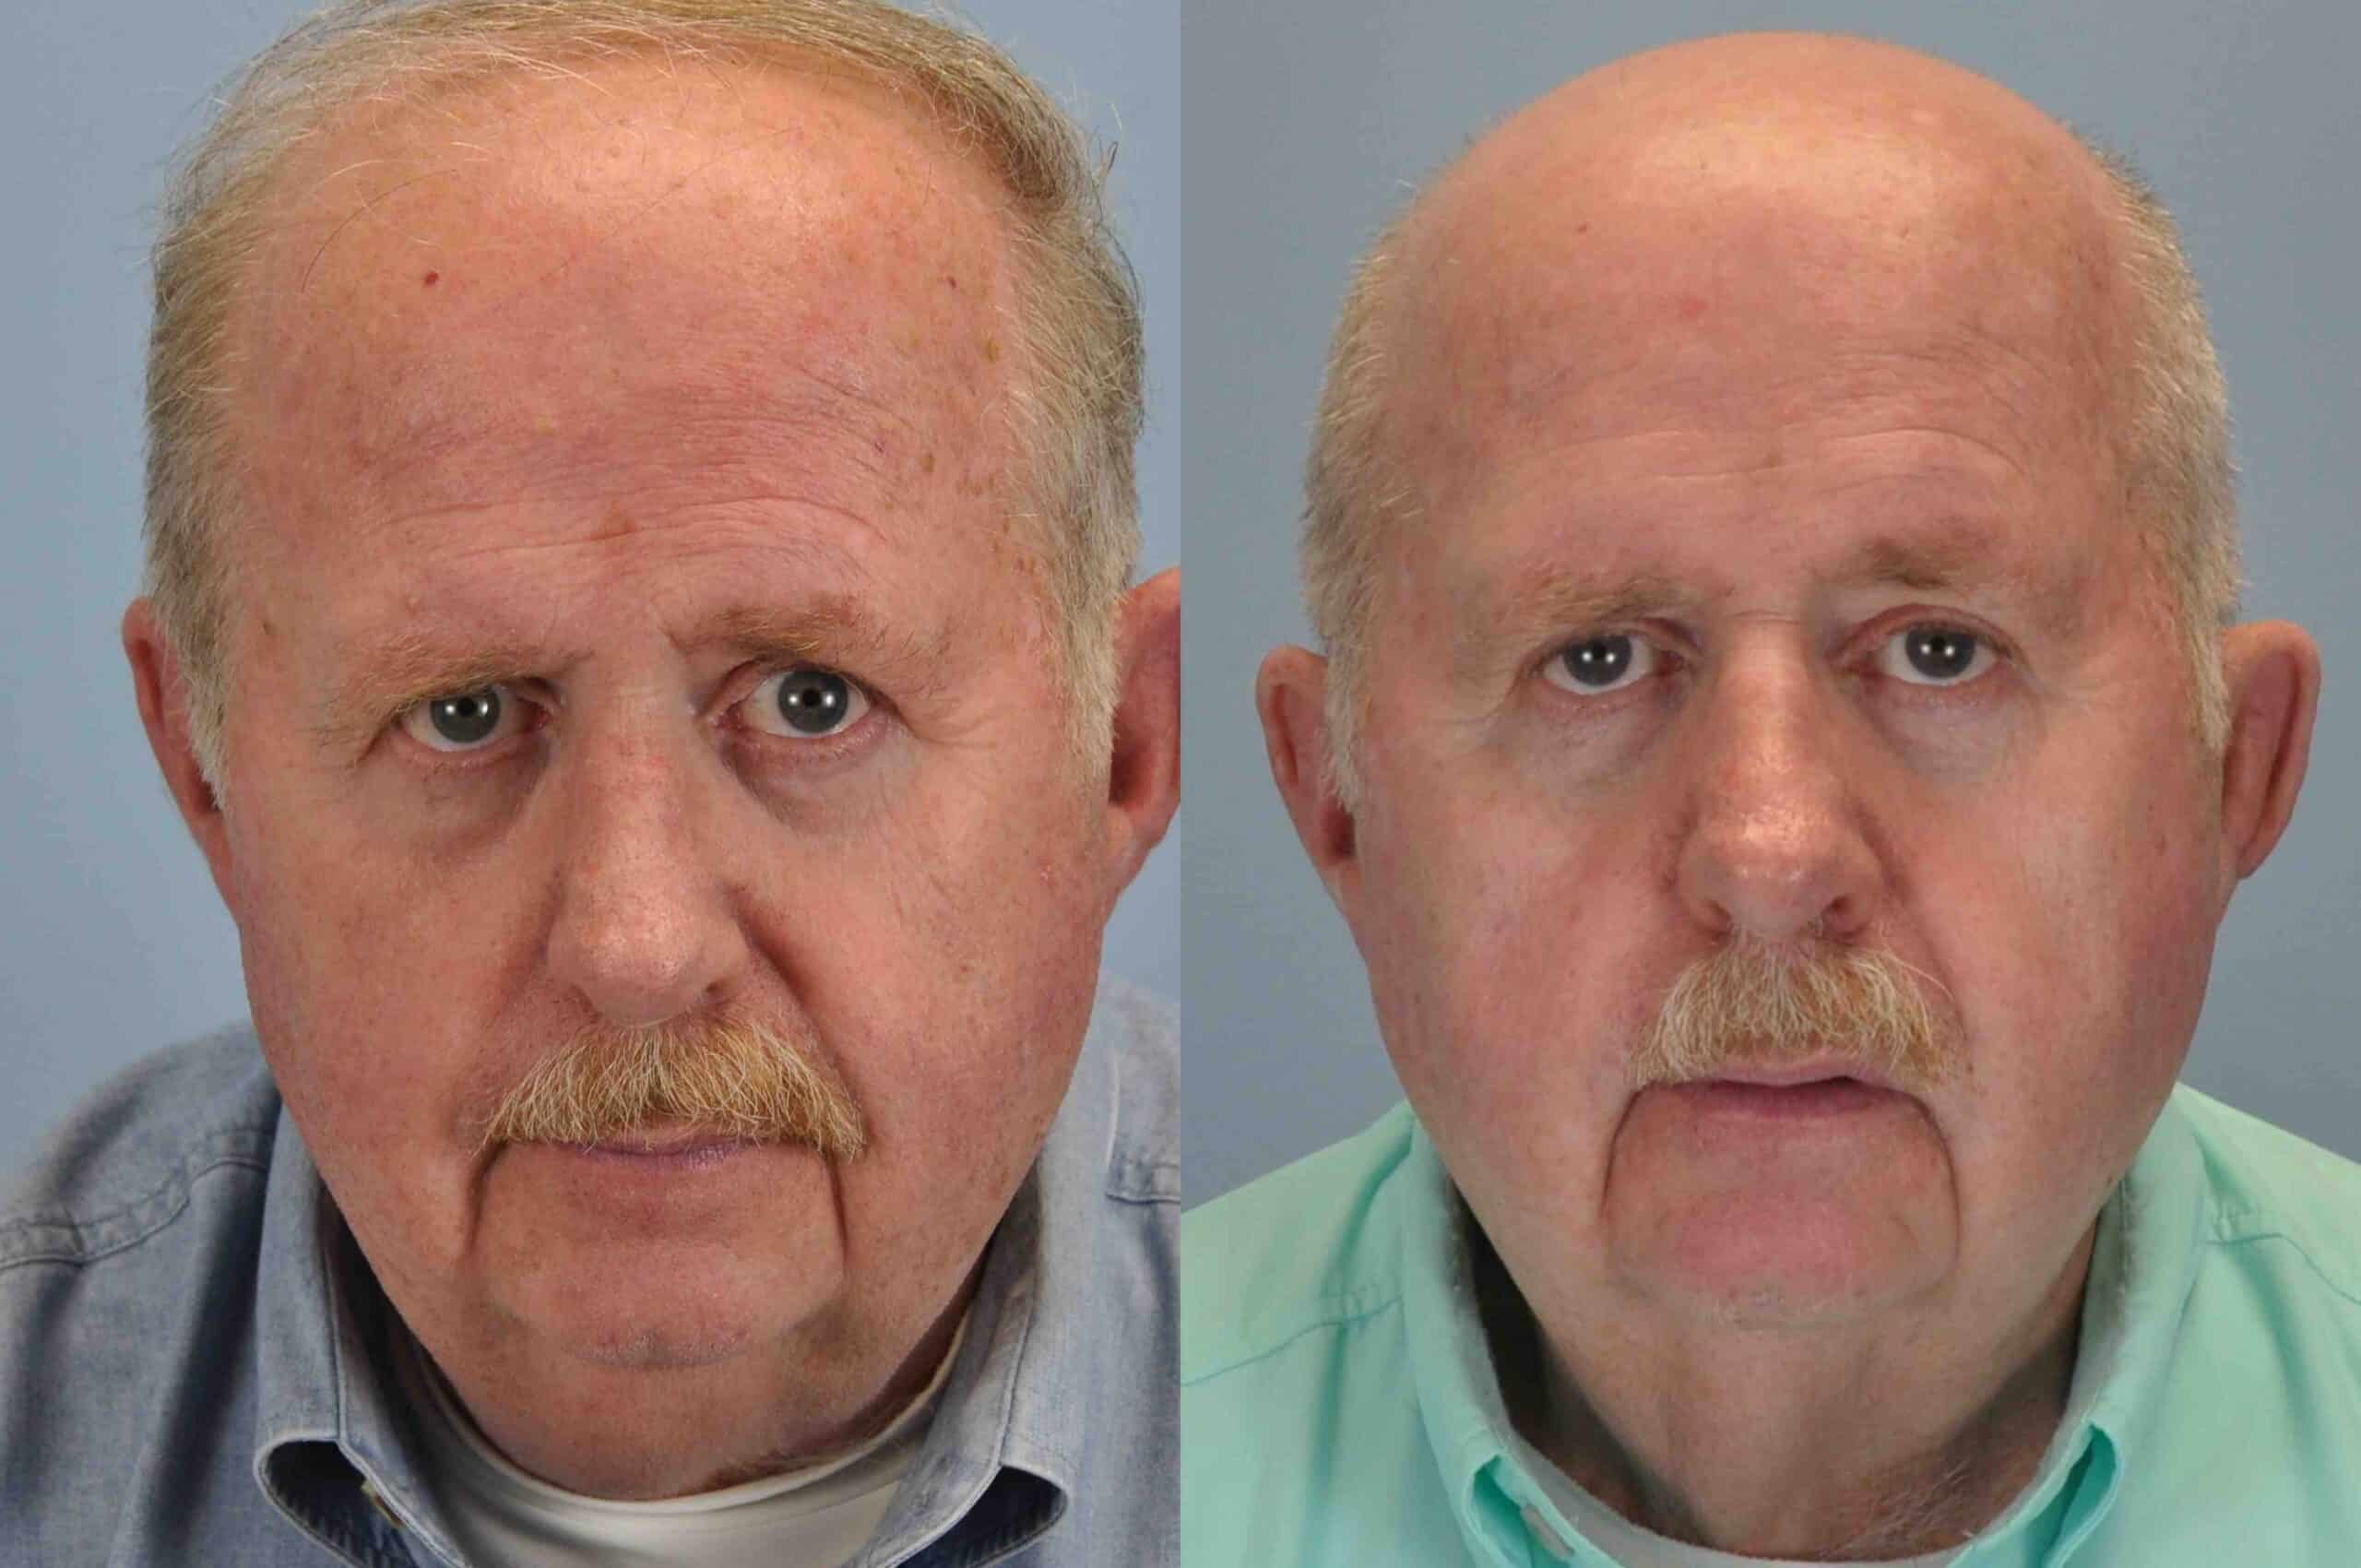 Before and after, 7 mo post-treatment from Laser Resurfacing, Mentor Peel performed by Dr. Paul Vanek (front view)